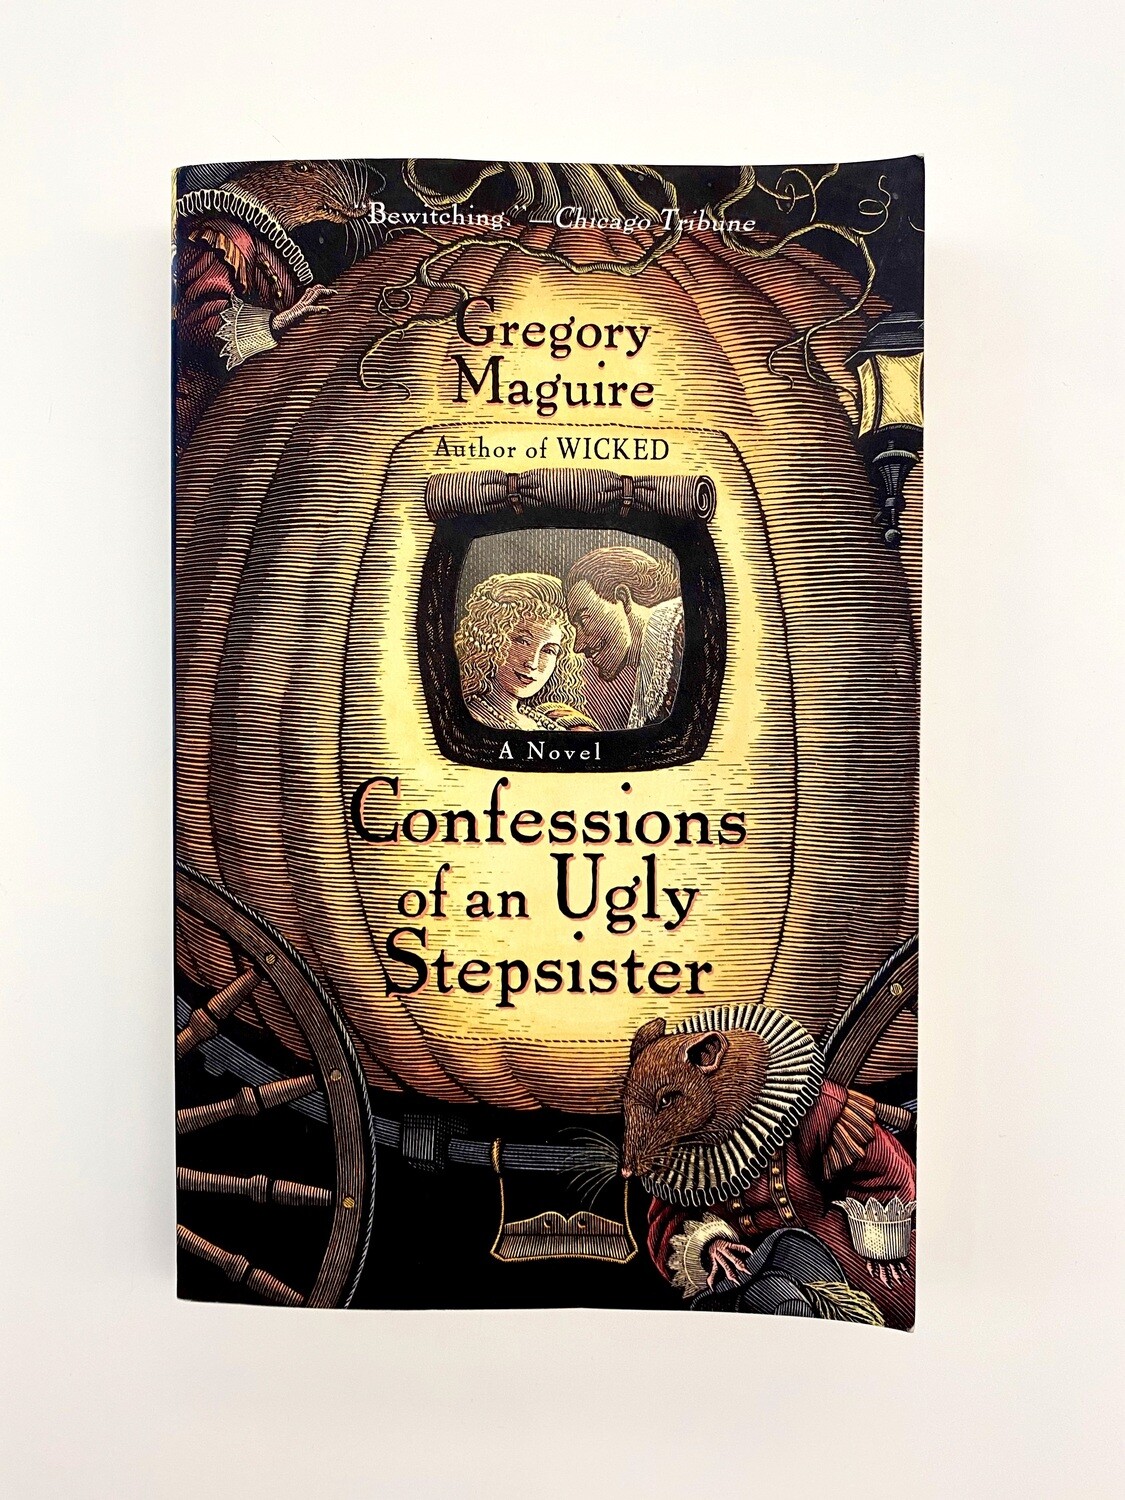 USED - Confessions of an Ugly Stepsister, Gregory Maguire